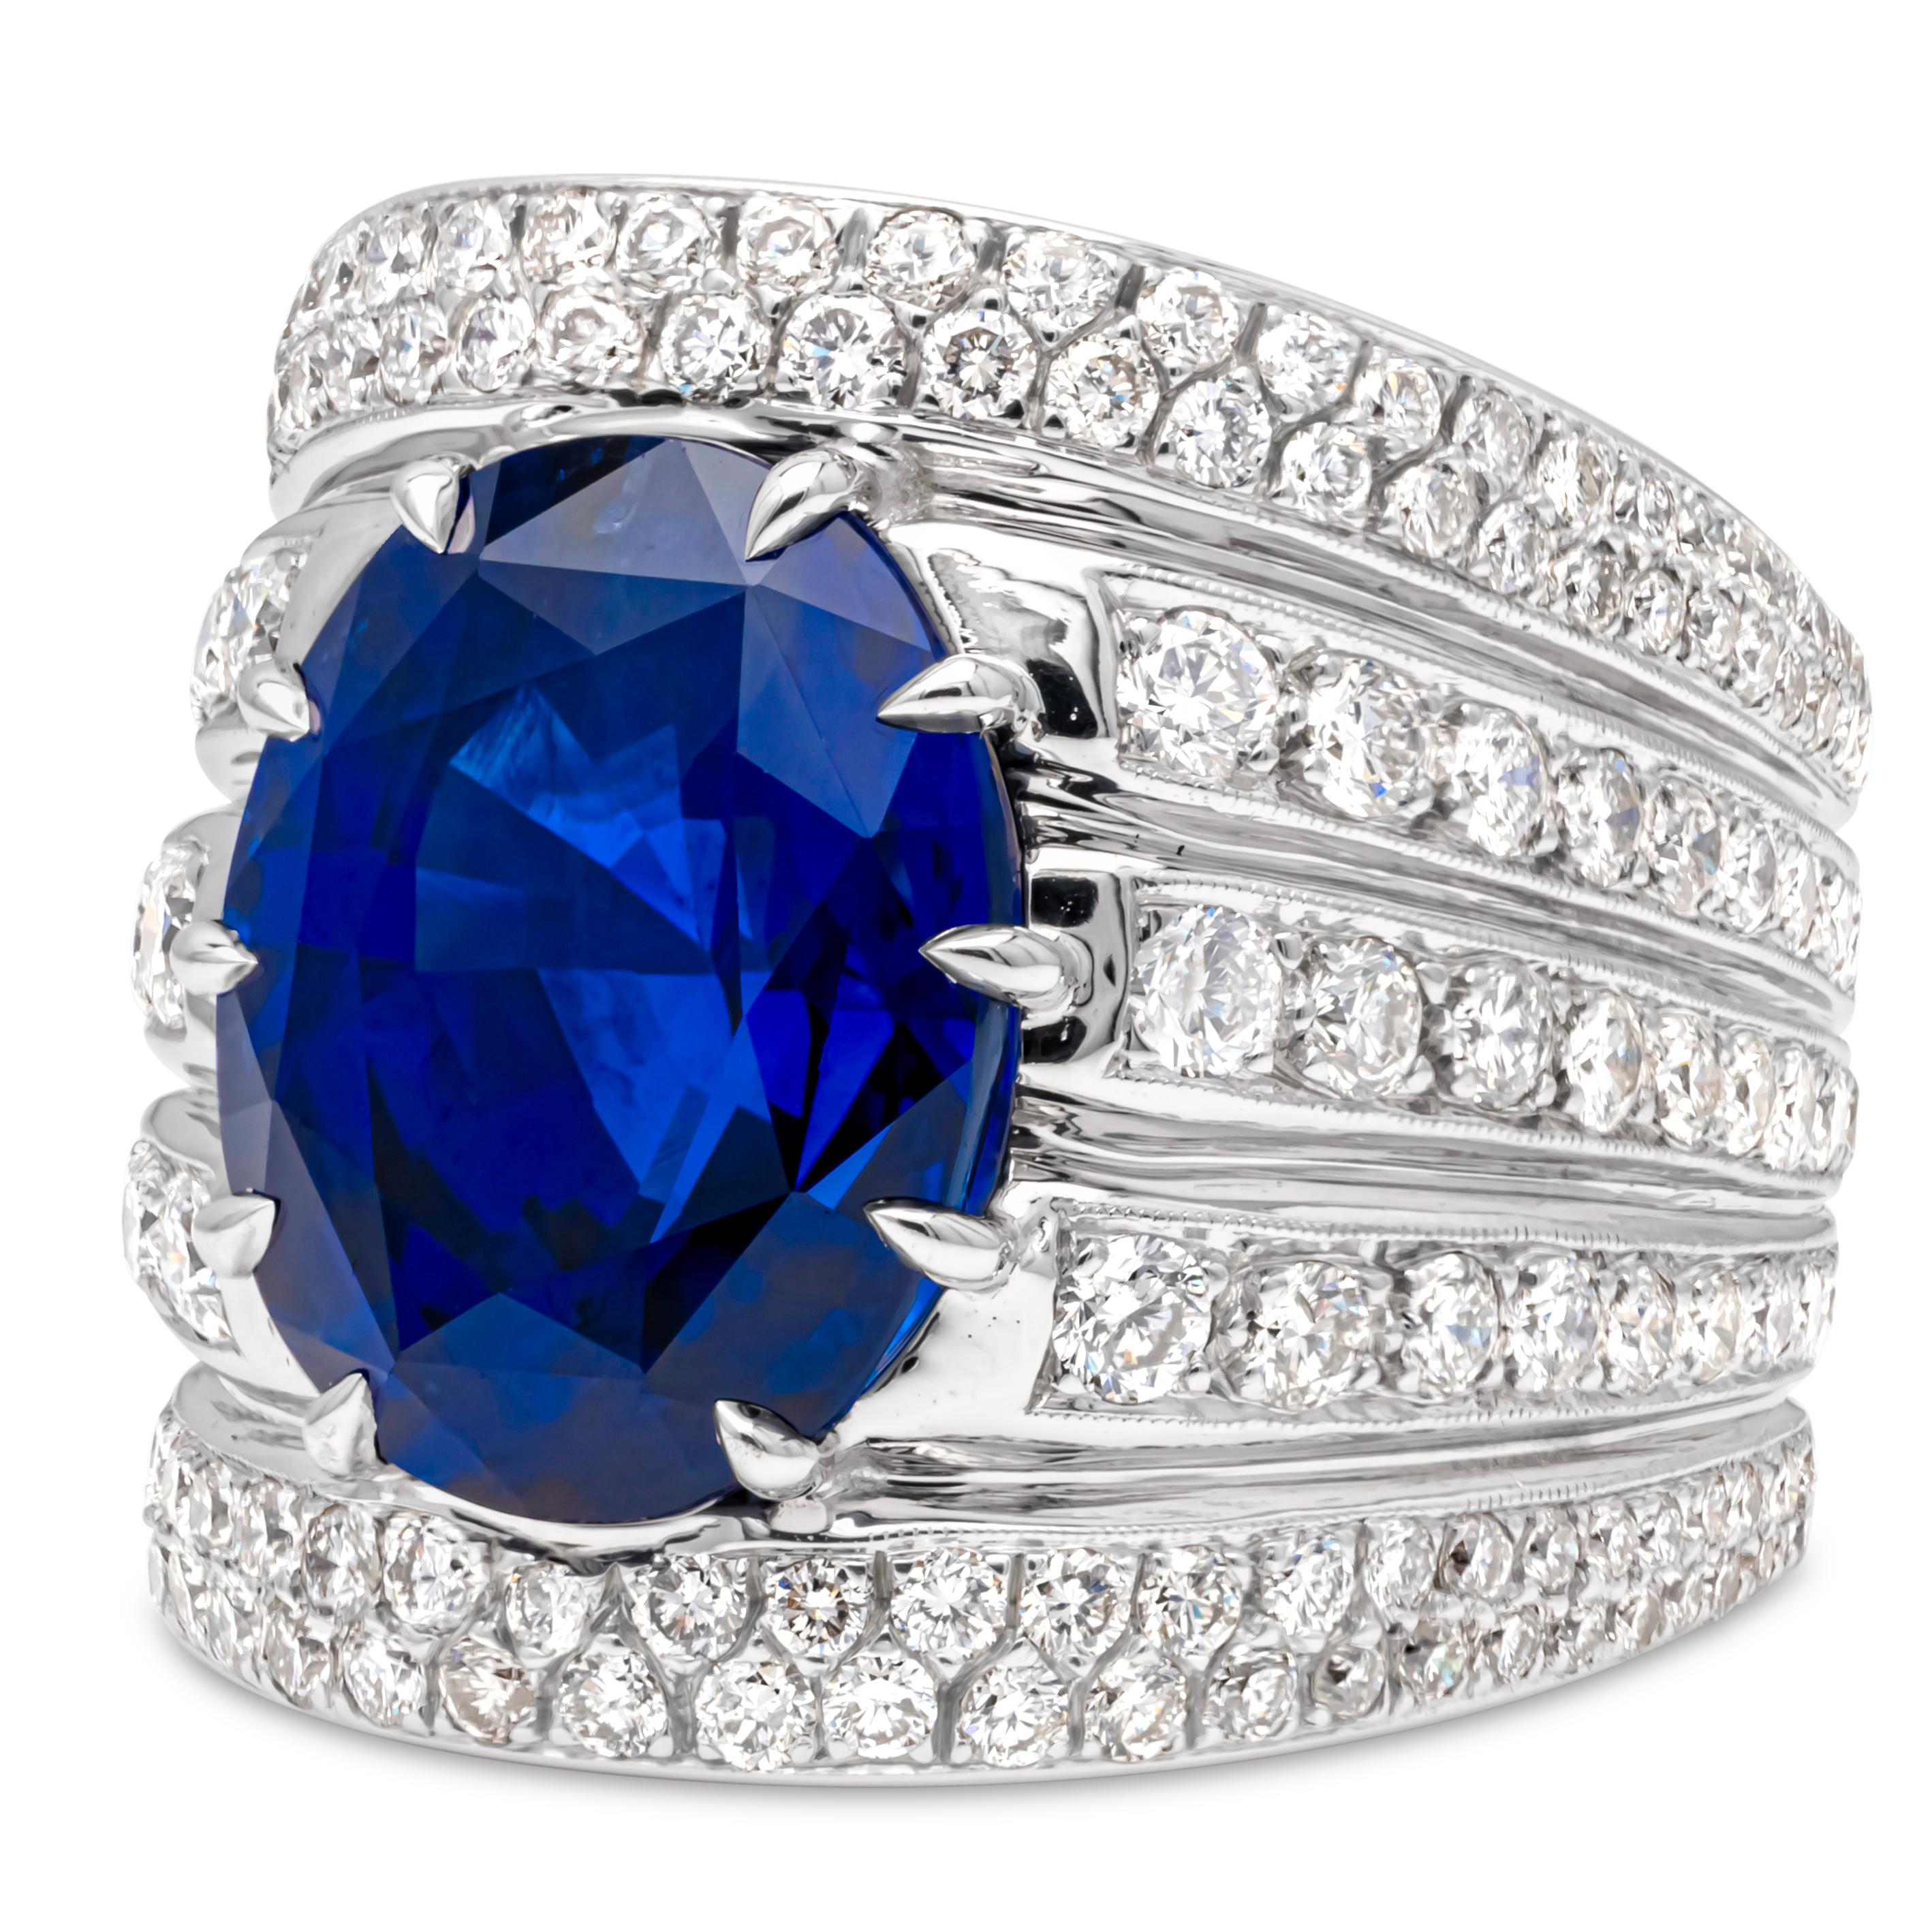 An appealing and charming cocktail fashion ring showcasing a single oval cut Sri Lanka royal vivid blue sapphire weighing 15.27 carats total, Set in a beautiful wide band accented with five rows of 176 brilliant round cut diamonds weighing 3.25